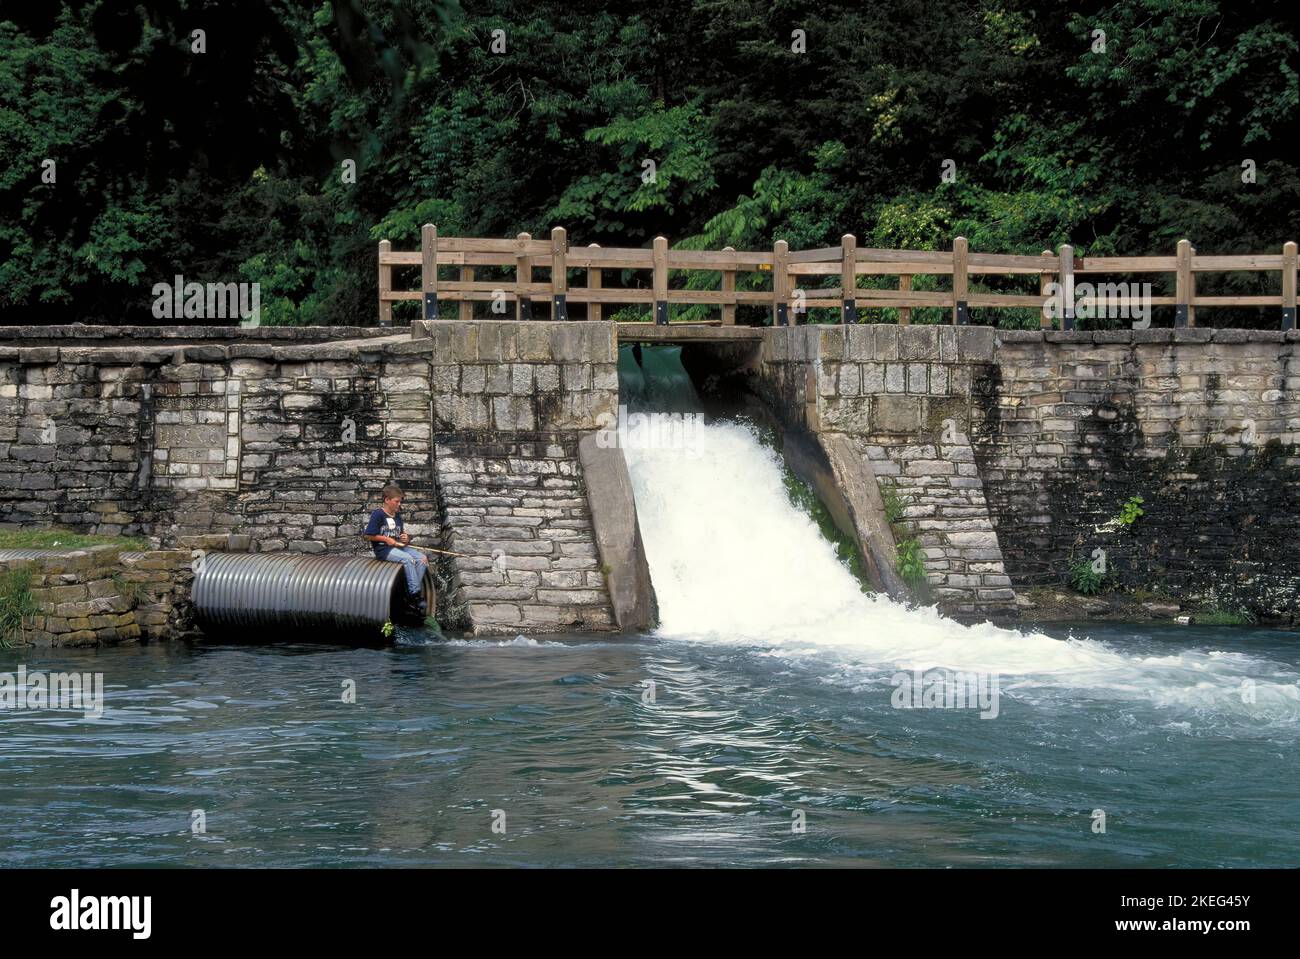 A lone boy fishes by the spillway at Roaring River State Park near Cassville, Missouri on July 2, 2005. Roaring River is one of Missouri's cold water Stock Photo